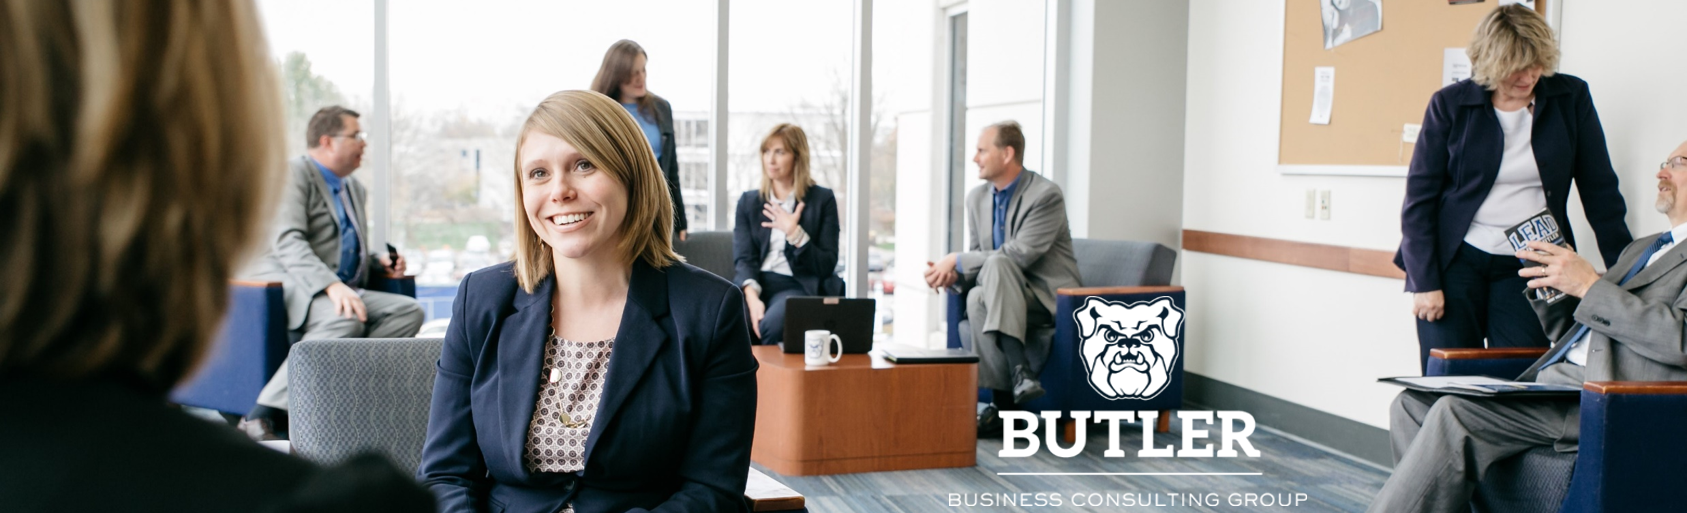 Butler Business Consulting Group